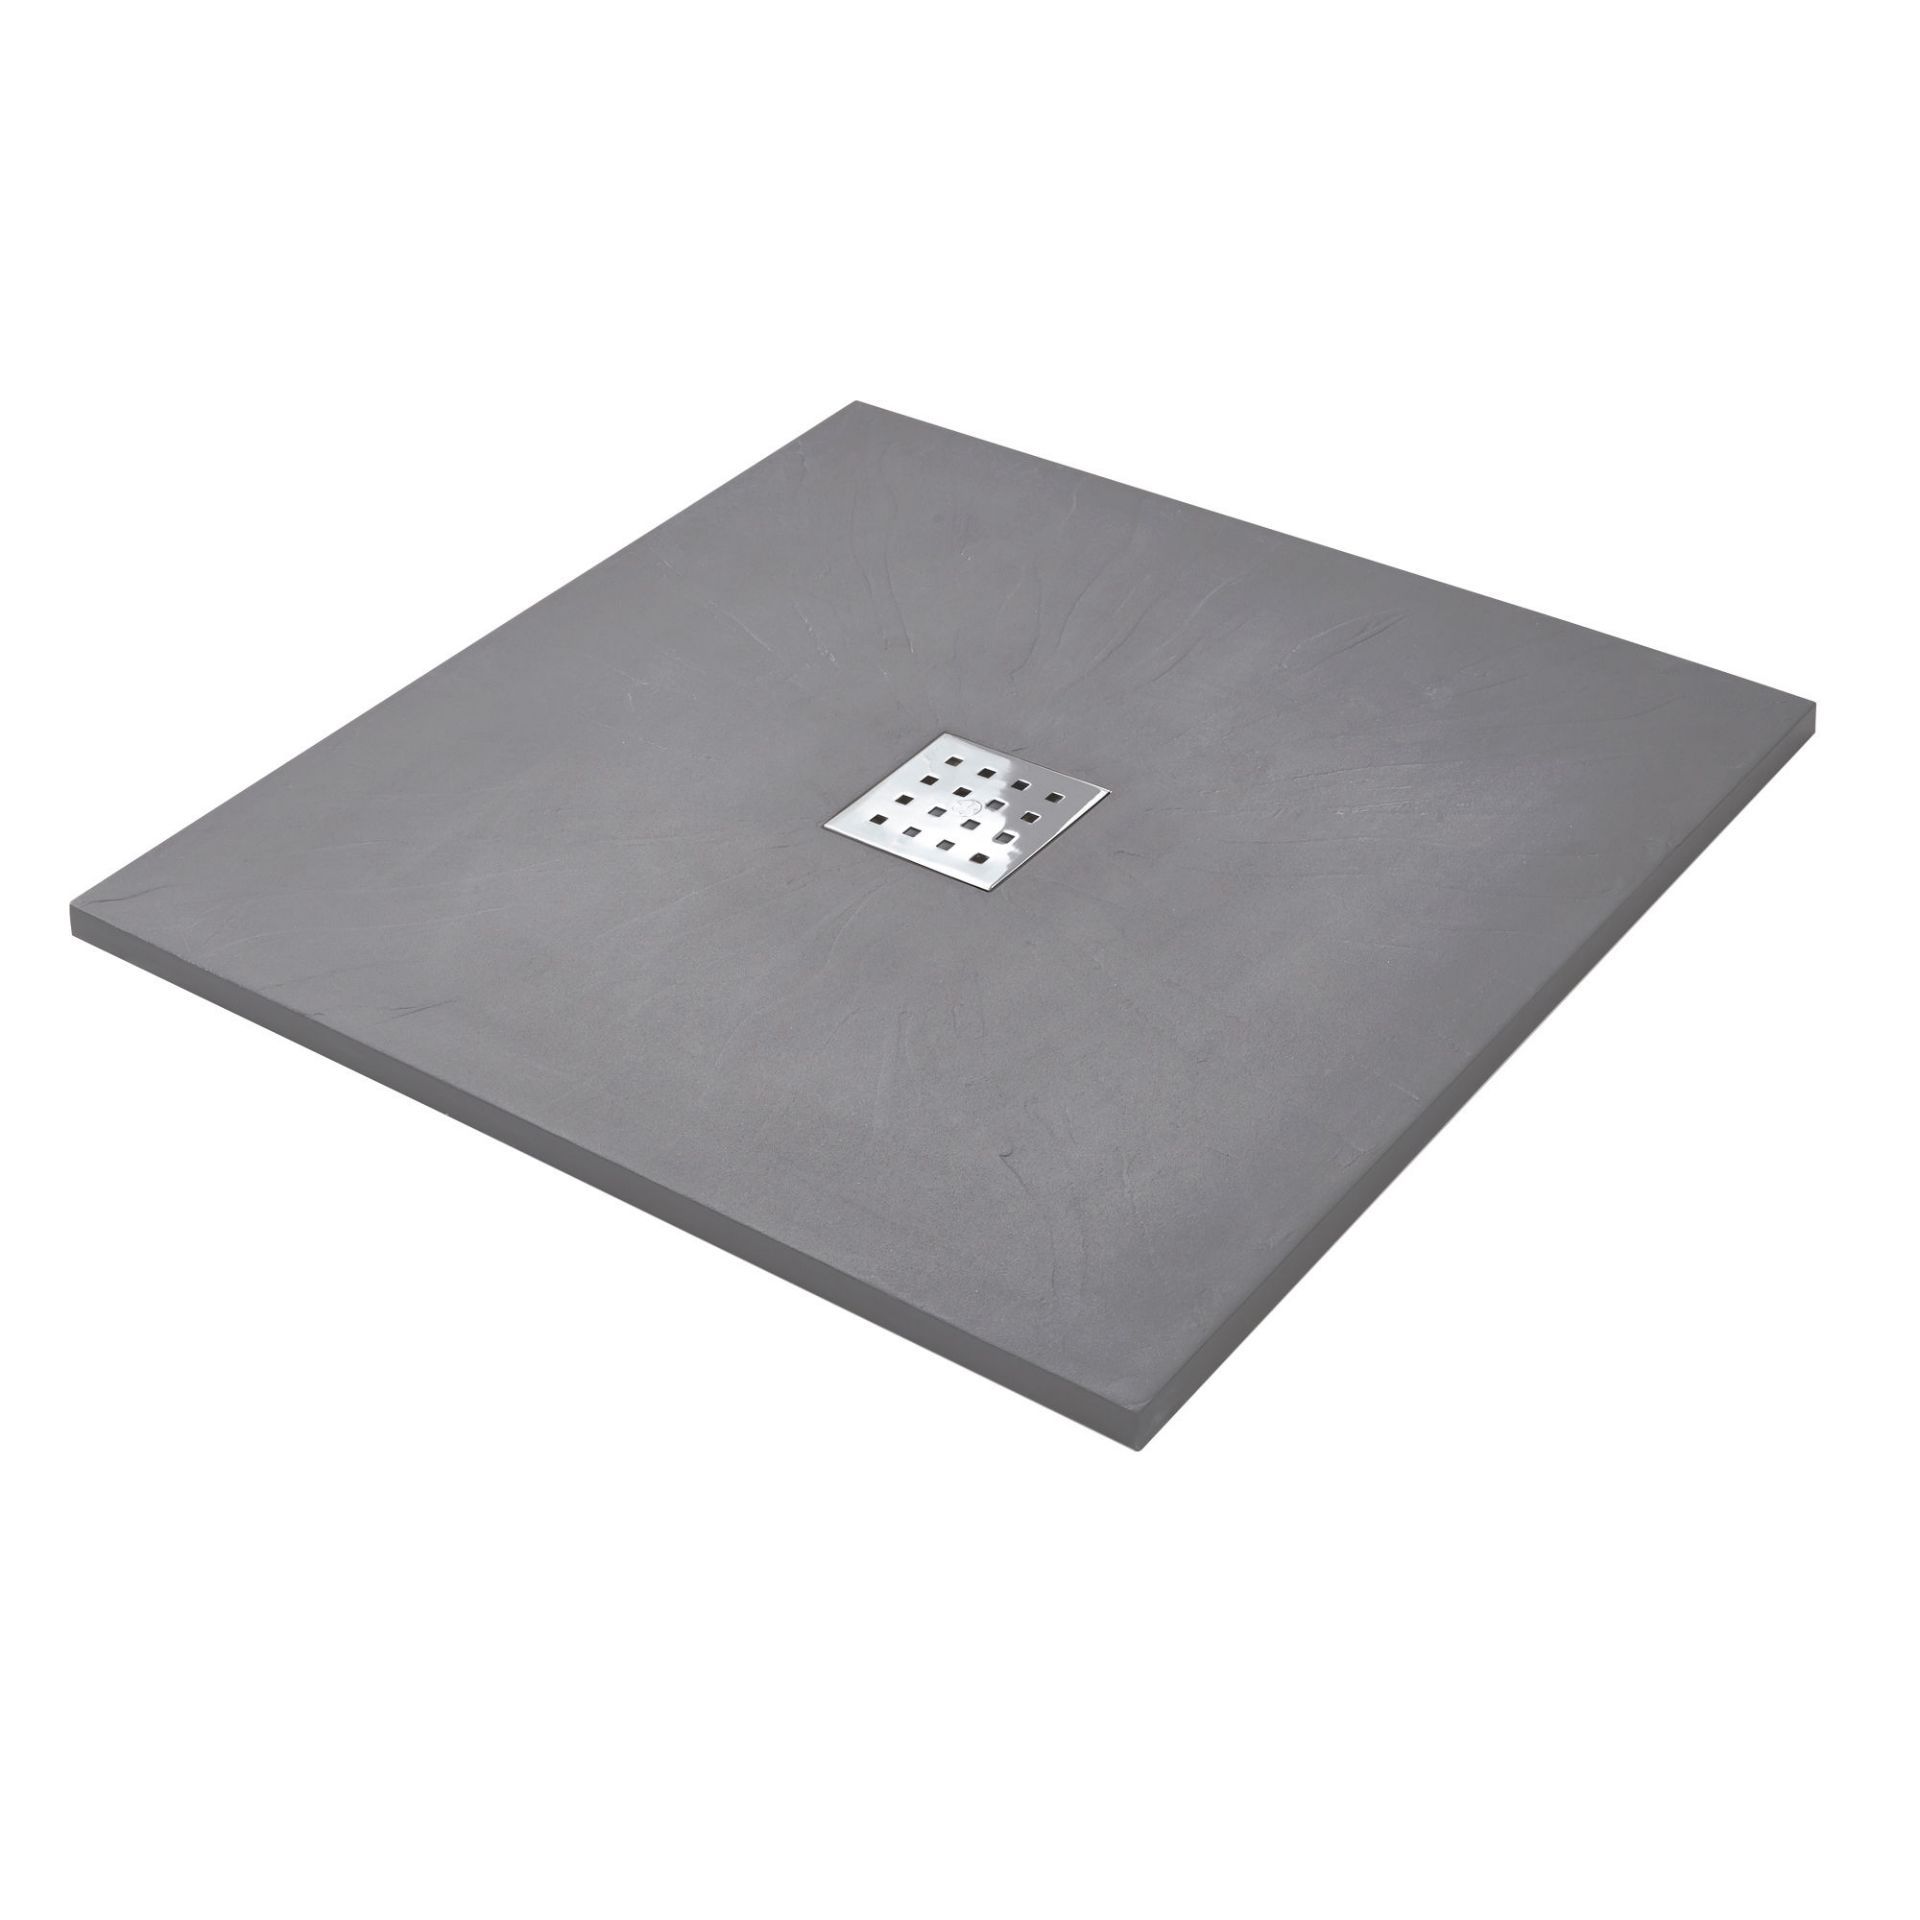 900x900mm Square Slate Effect Shower Tray in Grey. Manufactured in the UK from high grade stone... - Image 2 of 3